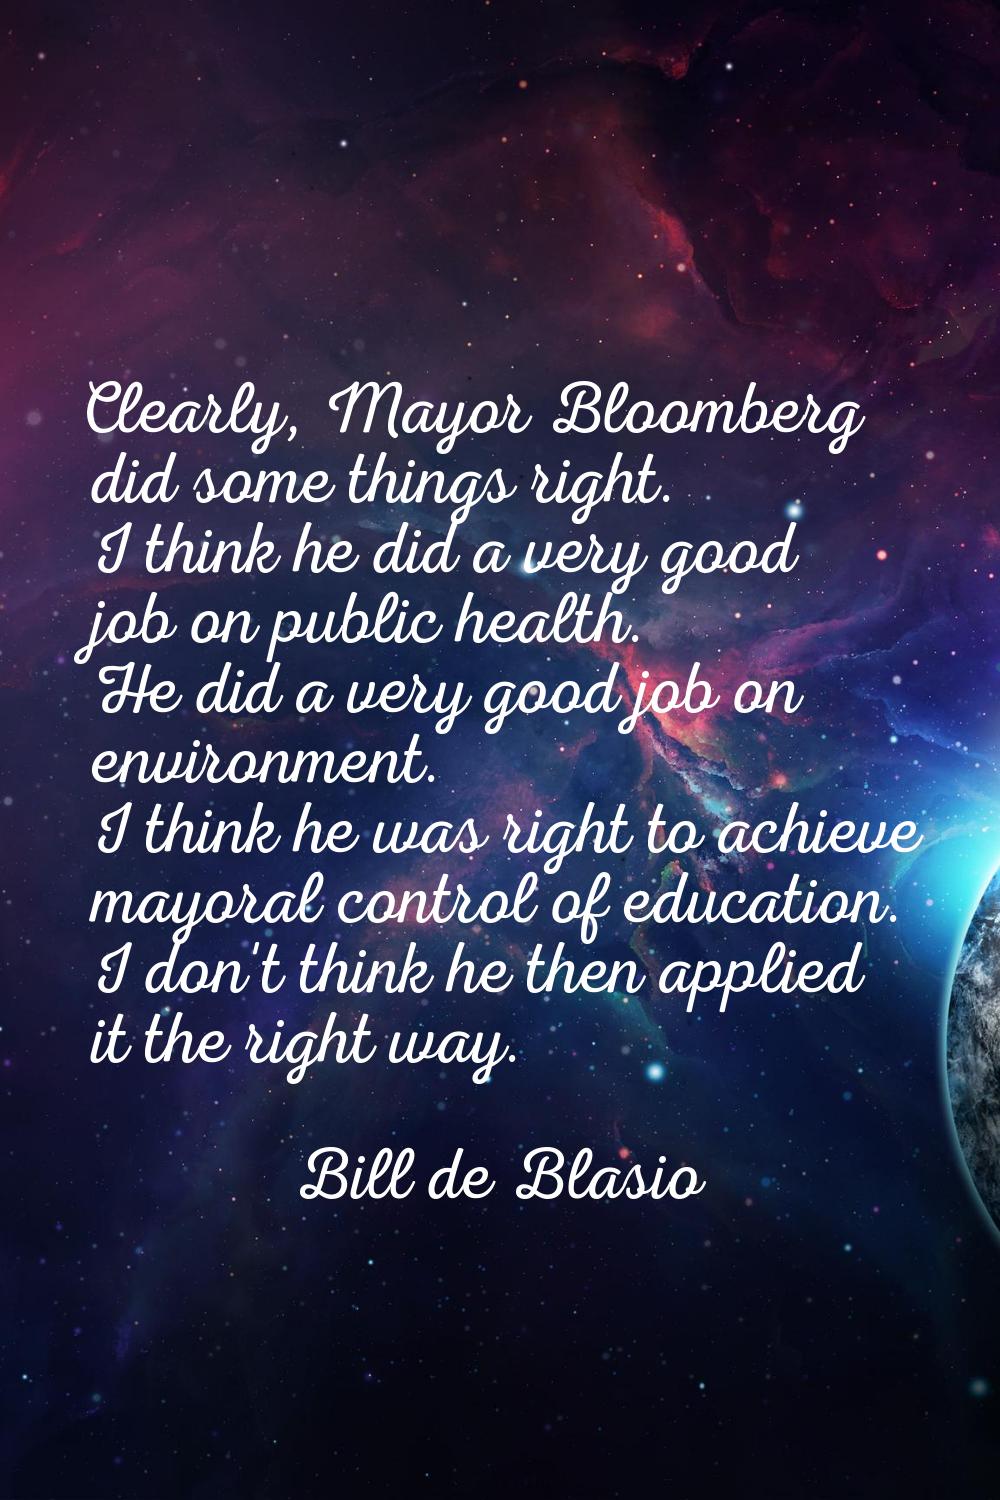 Clearly, Mayor Bloomberg did some things right. I think he did a very good job on public health. He